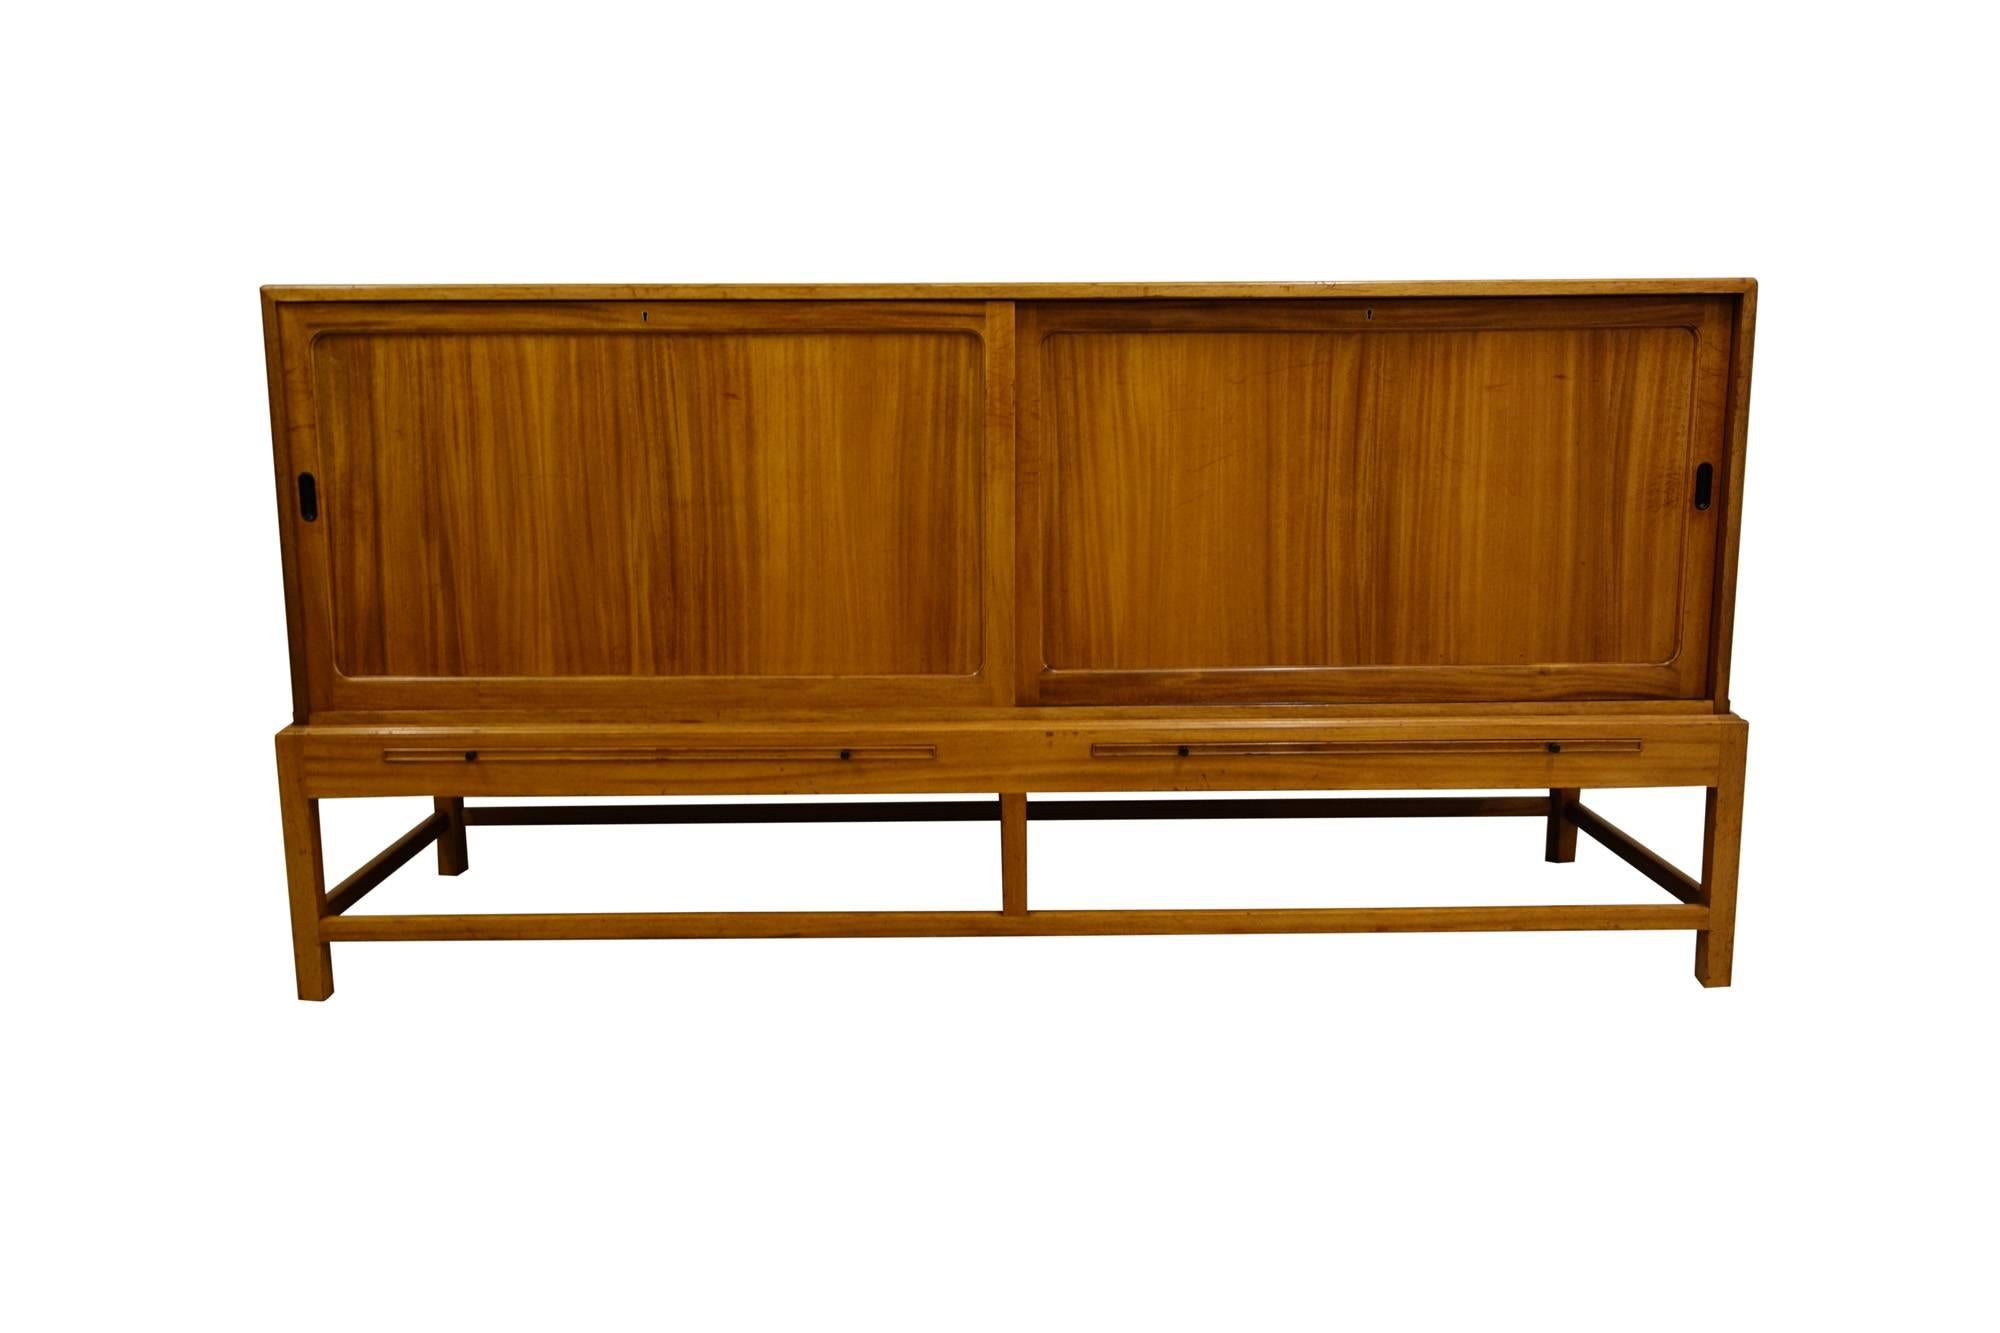 Kaare Klint sideboard in mahogany for Rud Rasmussen cabinetmakers, Copenhagen. Sideboard features two sliding doors concealing storage with eleven removable trays.

Signed with decal manufacturer's label to reverse: [Rud Rasmussens Snedkerier 45